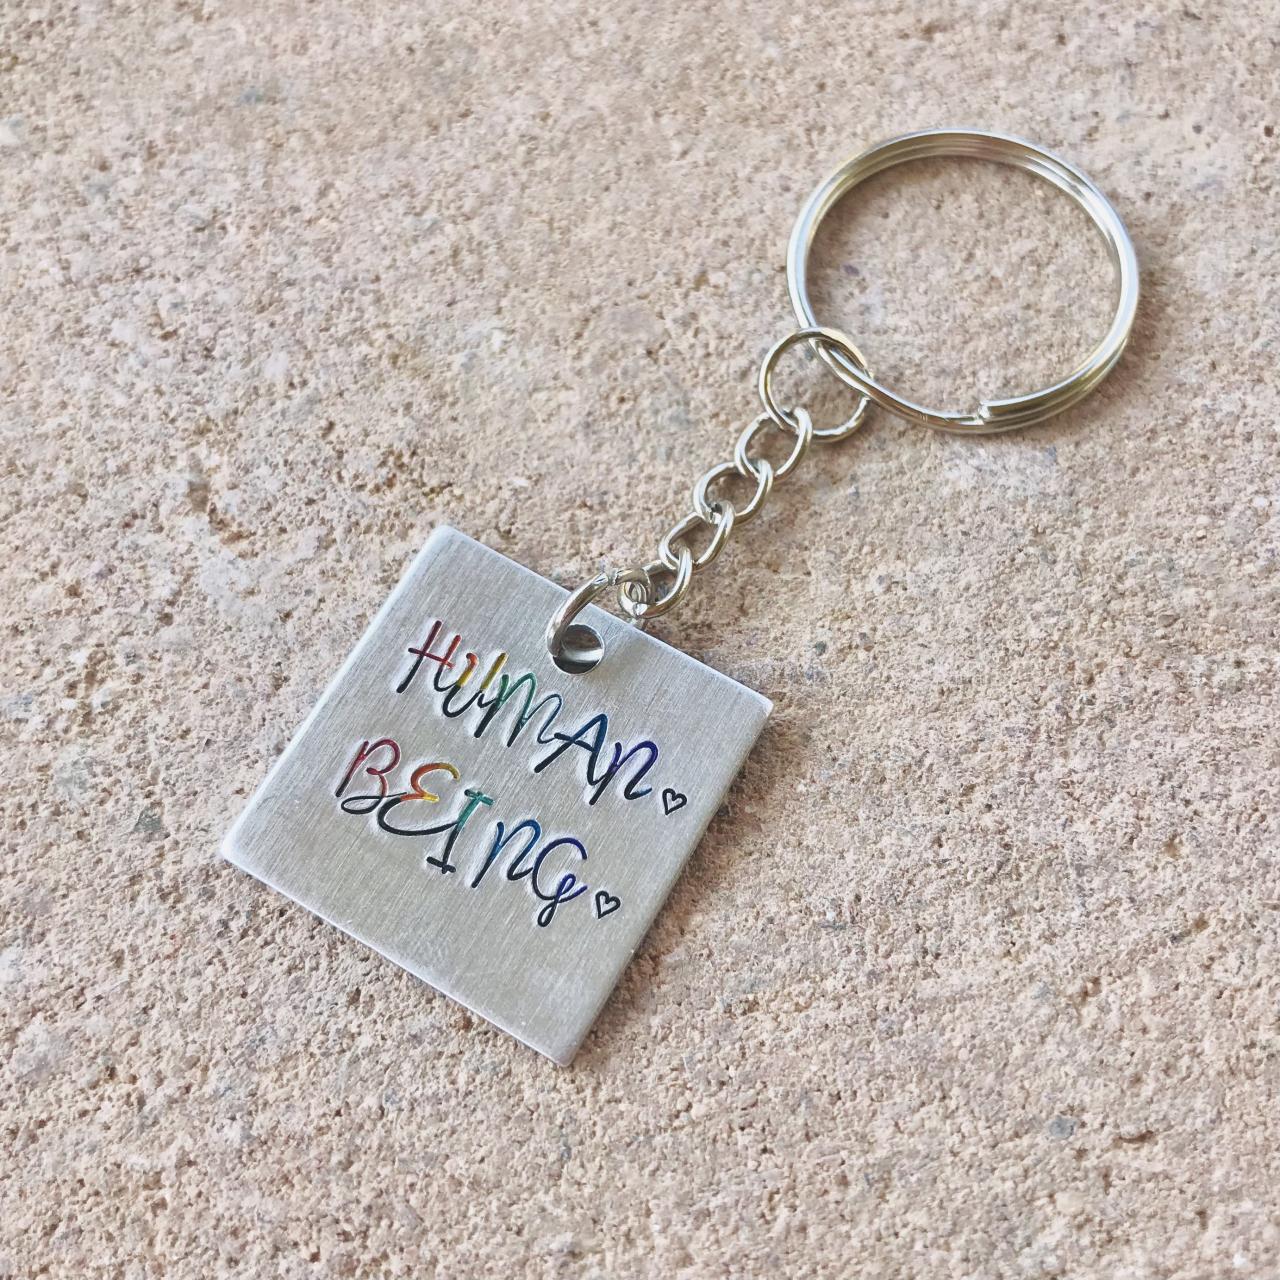 Human being Keychain, Pride, Friend, sister, Rainbow, Backpack Clip, Backpack Charm, Coming Out Gift, Gay Pride, they them, Lightweight